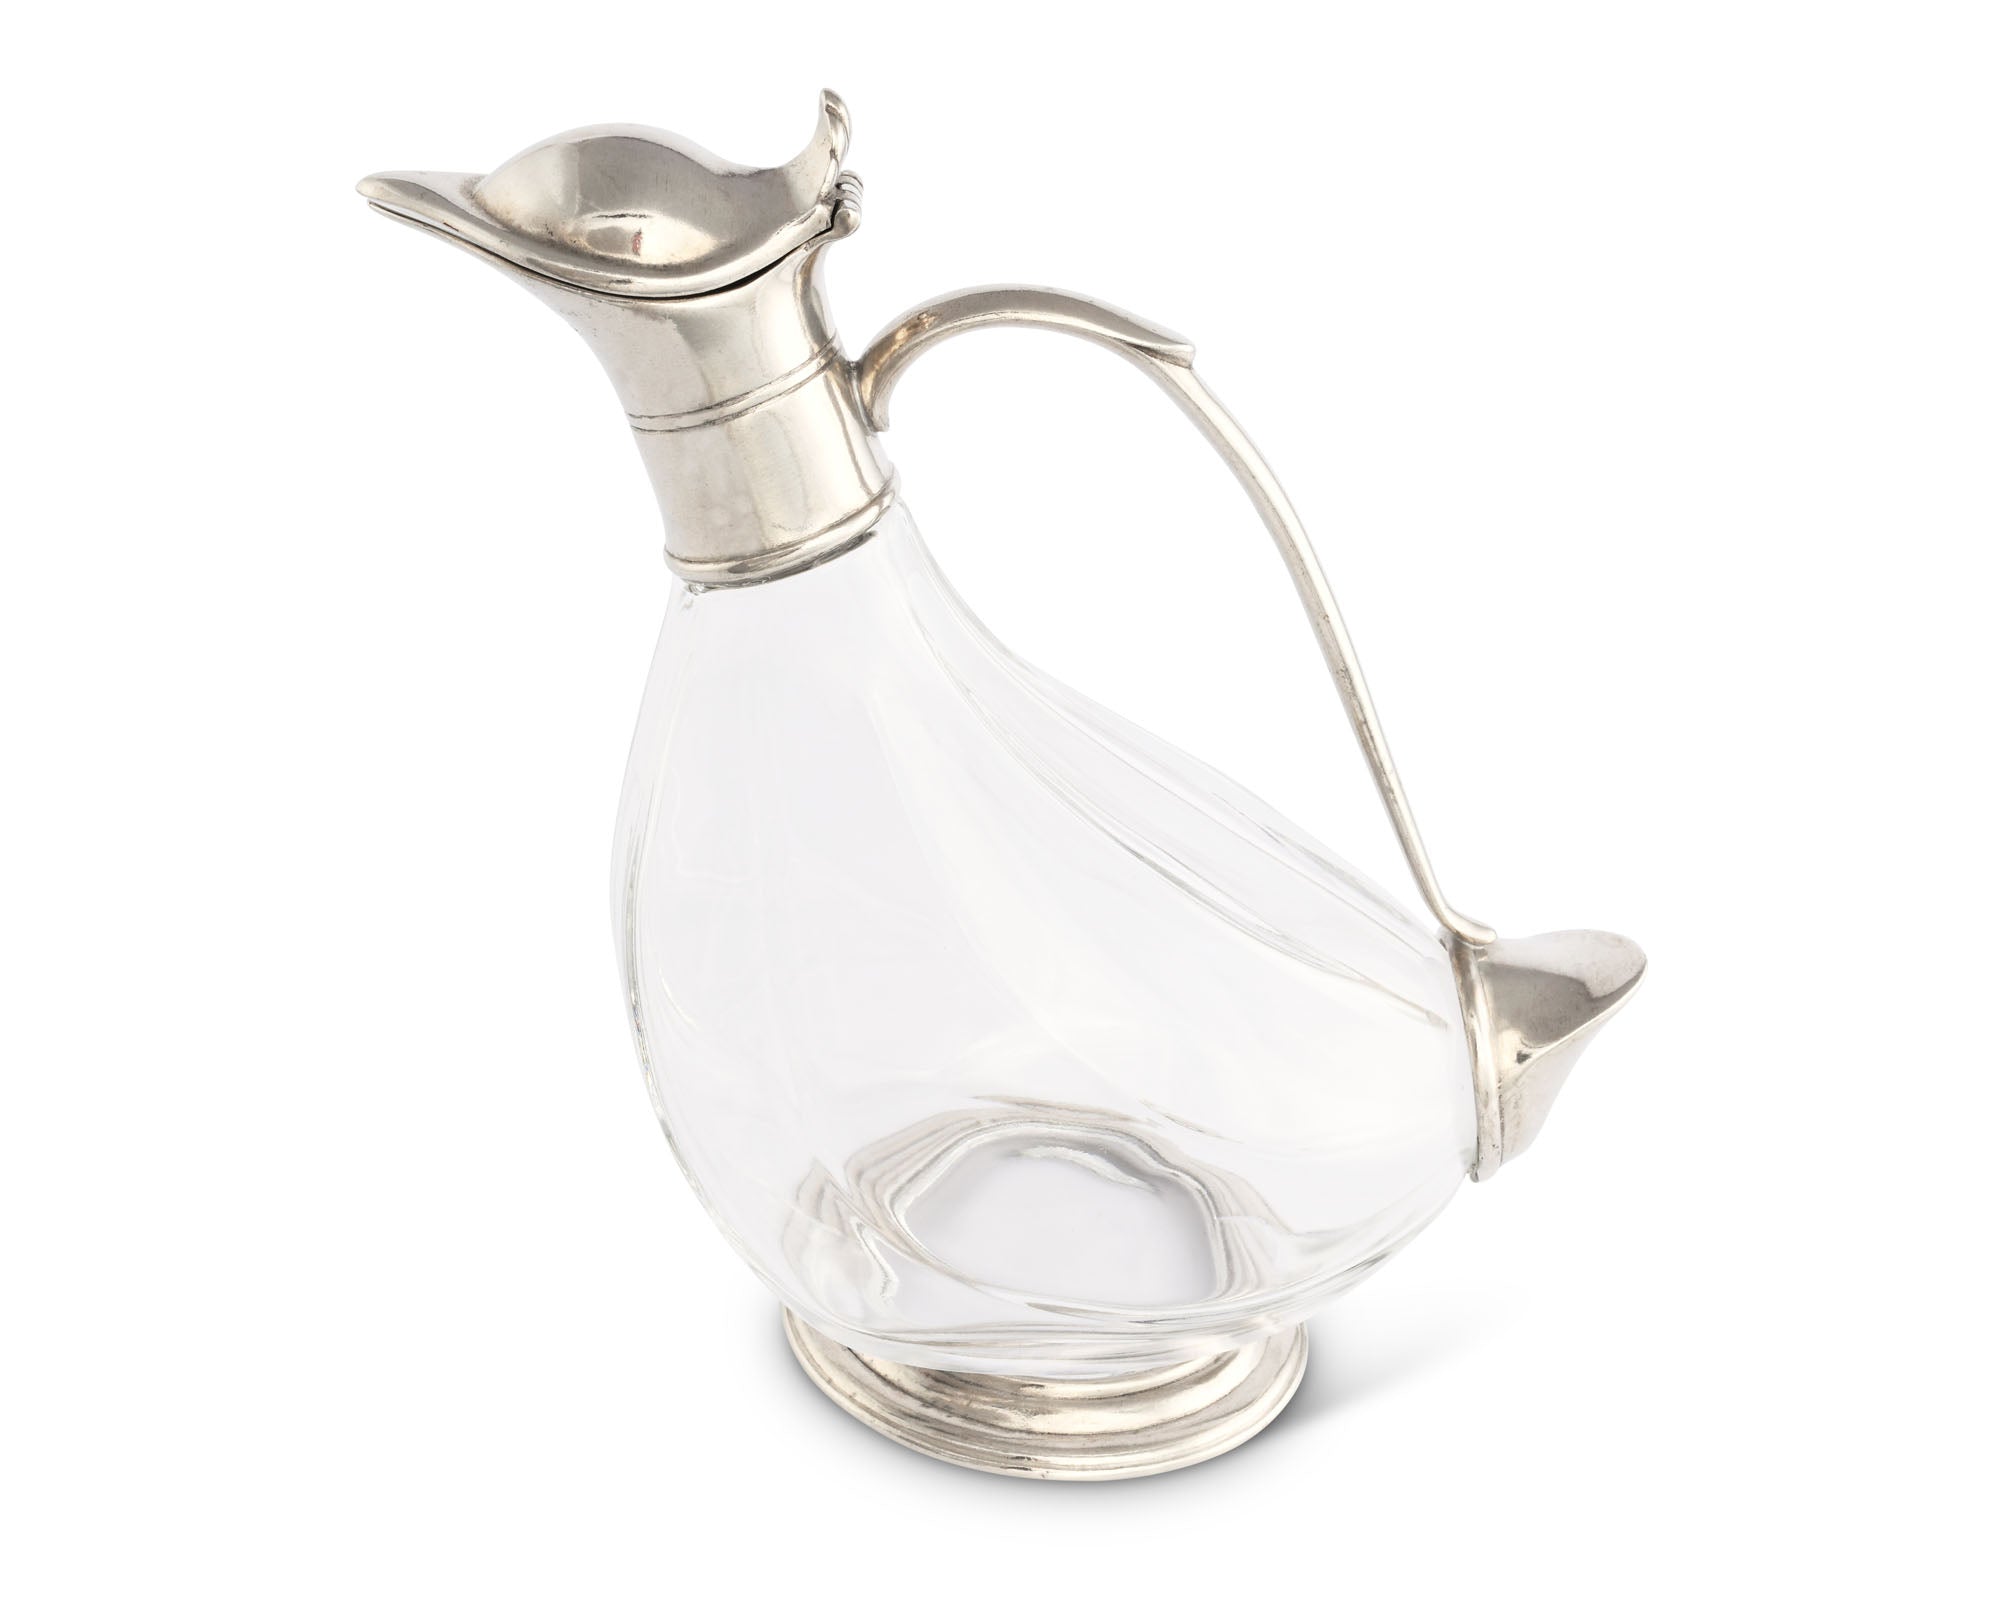 Vagabond House Duck Pewter Wine Decanter Product Image